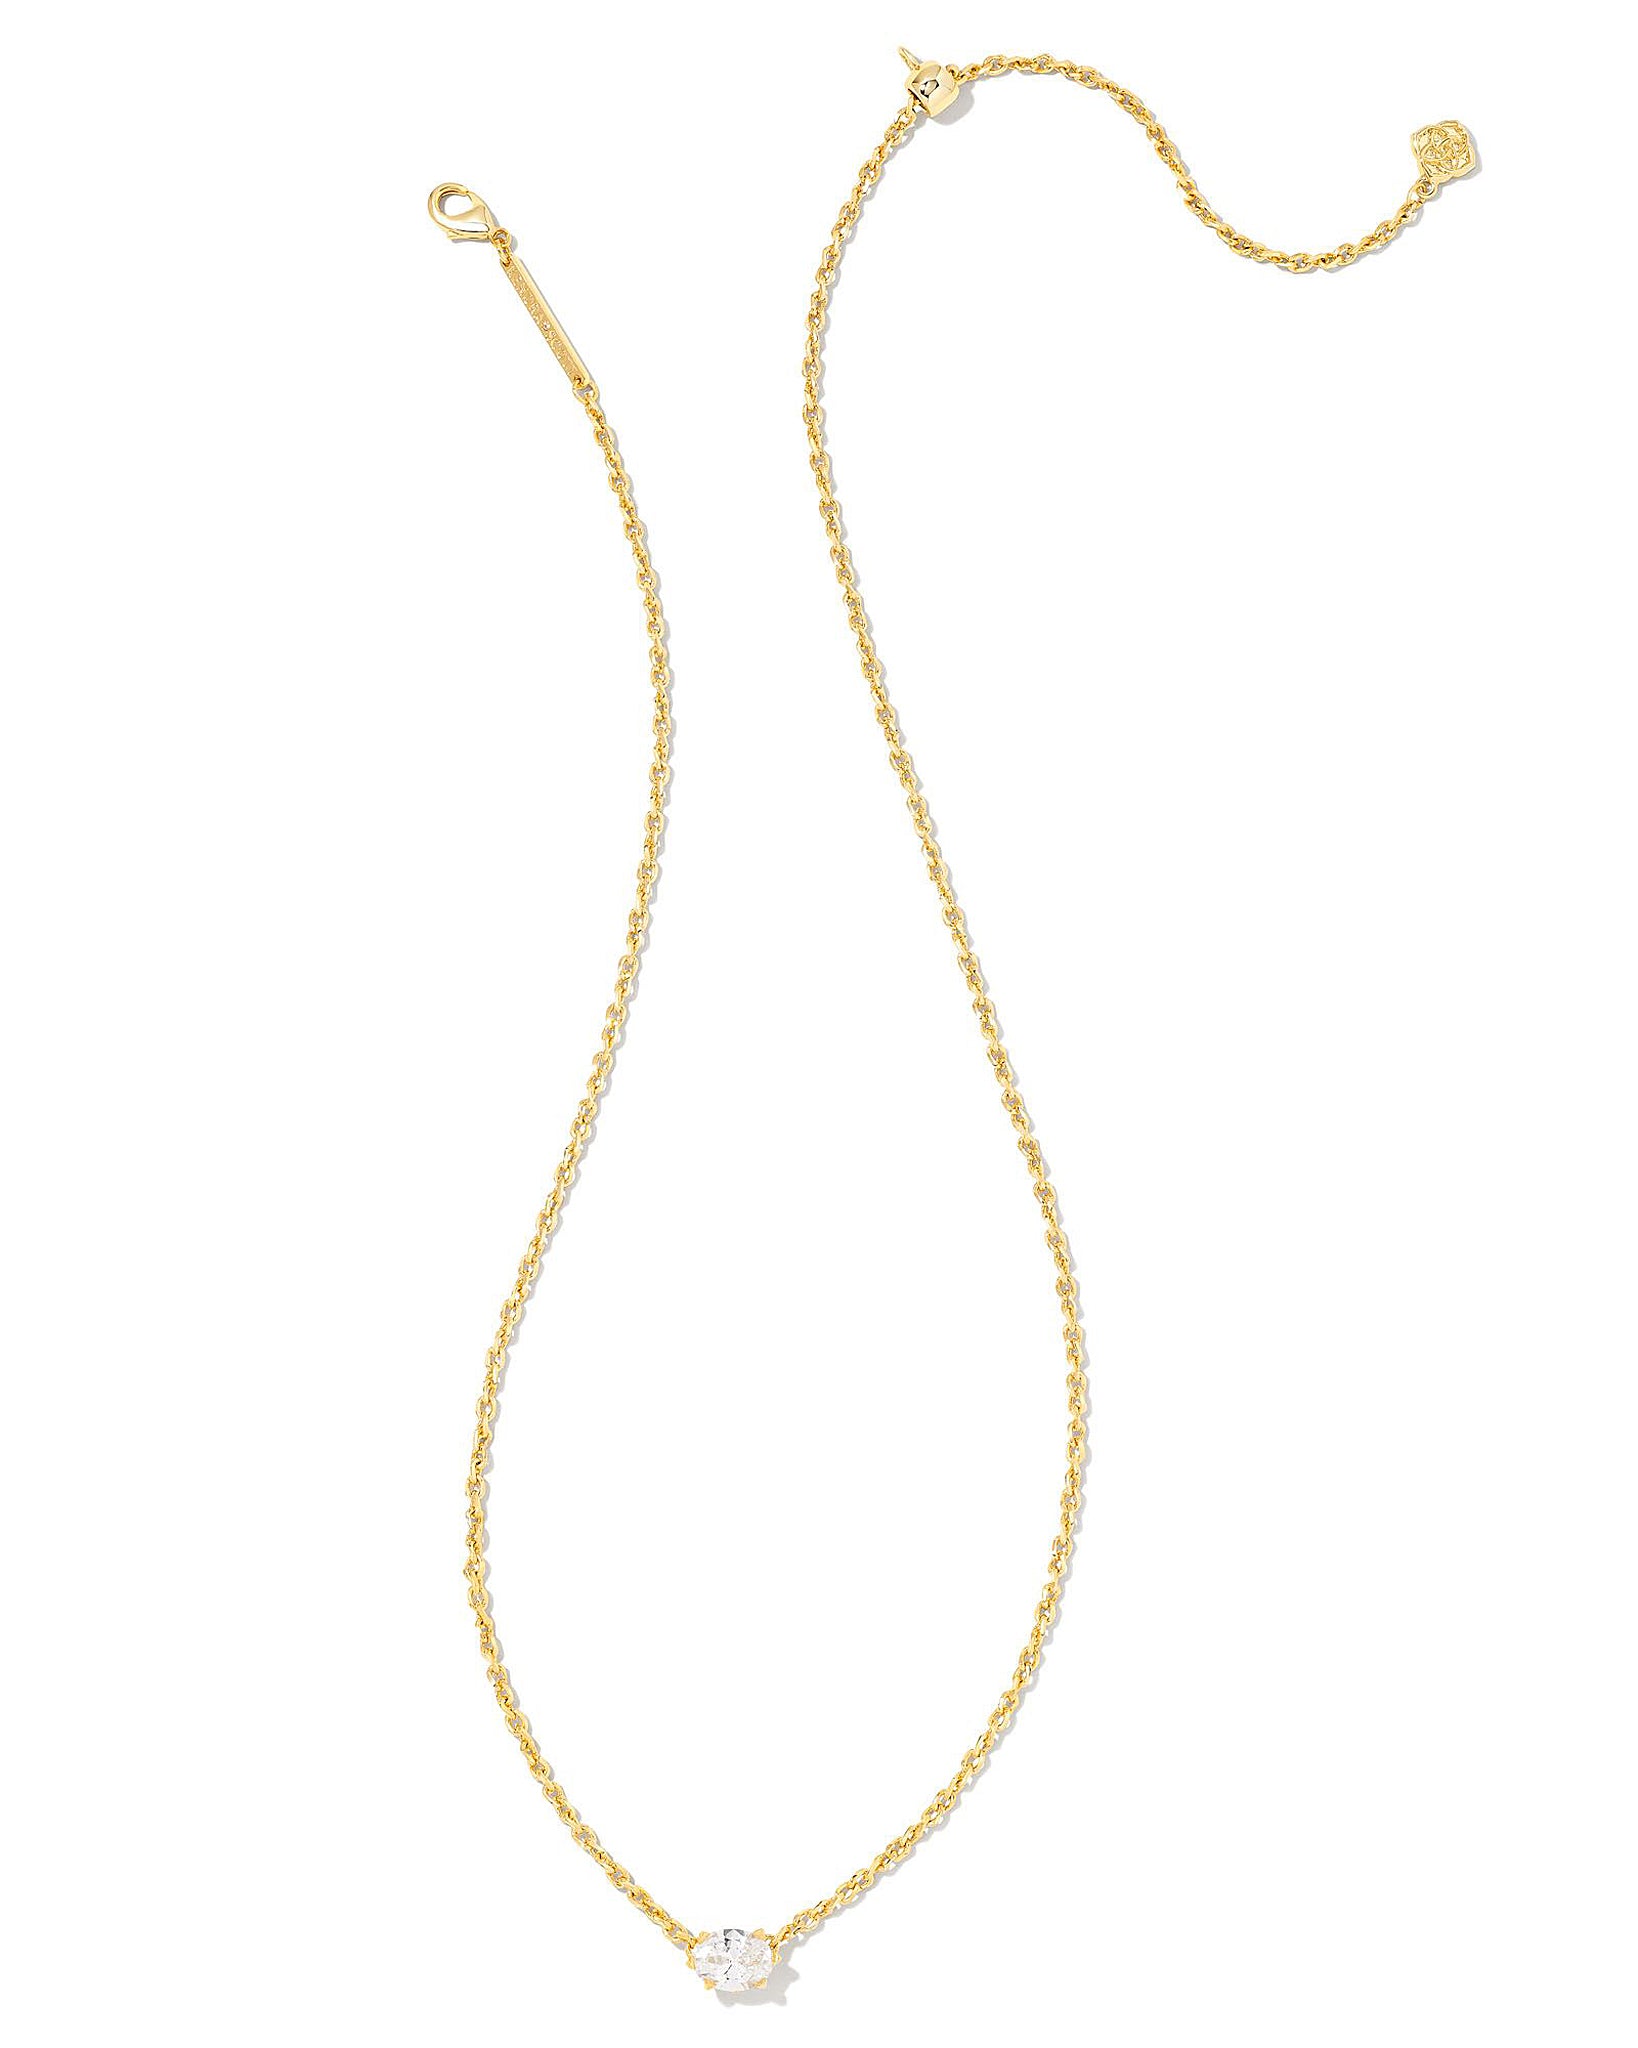 Kendra Scott Cailin Oval Pendant Necklace in White Cubic Zirconia and Gold